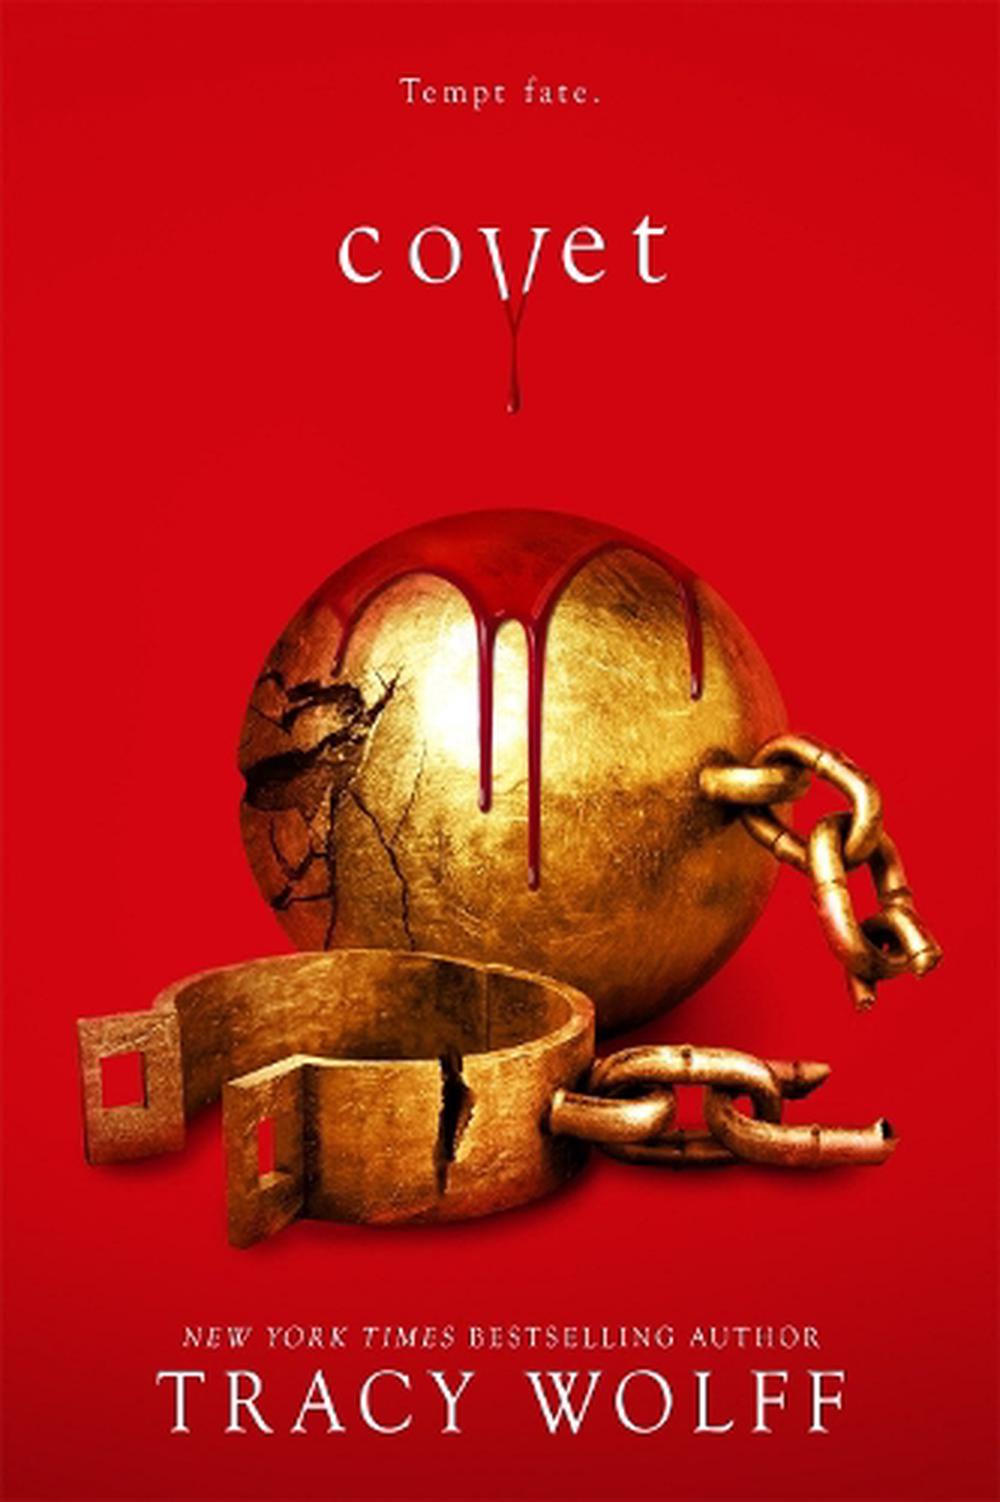 Covet by Tracy Wolff Hardcover 9781682815816 Buy online at The Nile